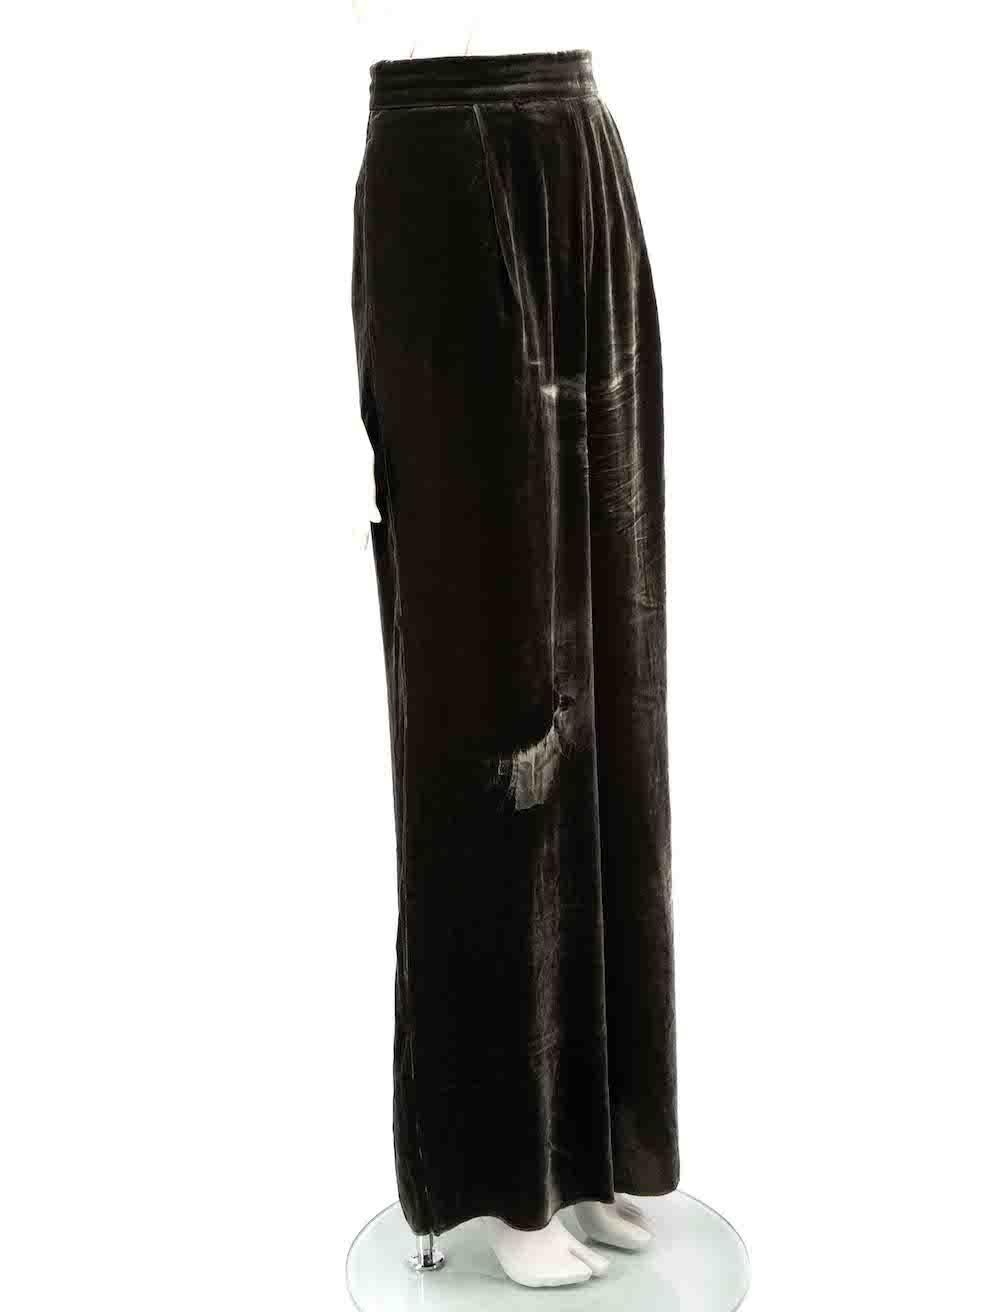 CONDITION is Very good. Hardly any visible wear to trousers is evident. However, the composition and size label is removed on this used Sportmax designer resale item.
 
 
 
 Details
 
 
 Khaki
 
 Velvet
 
 Wide leg trousers
 
 High rise
 
 Long